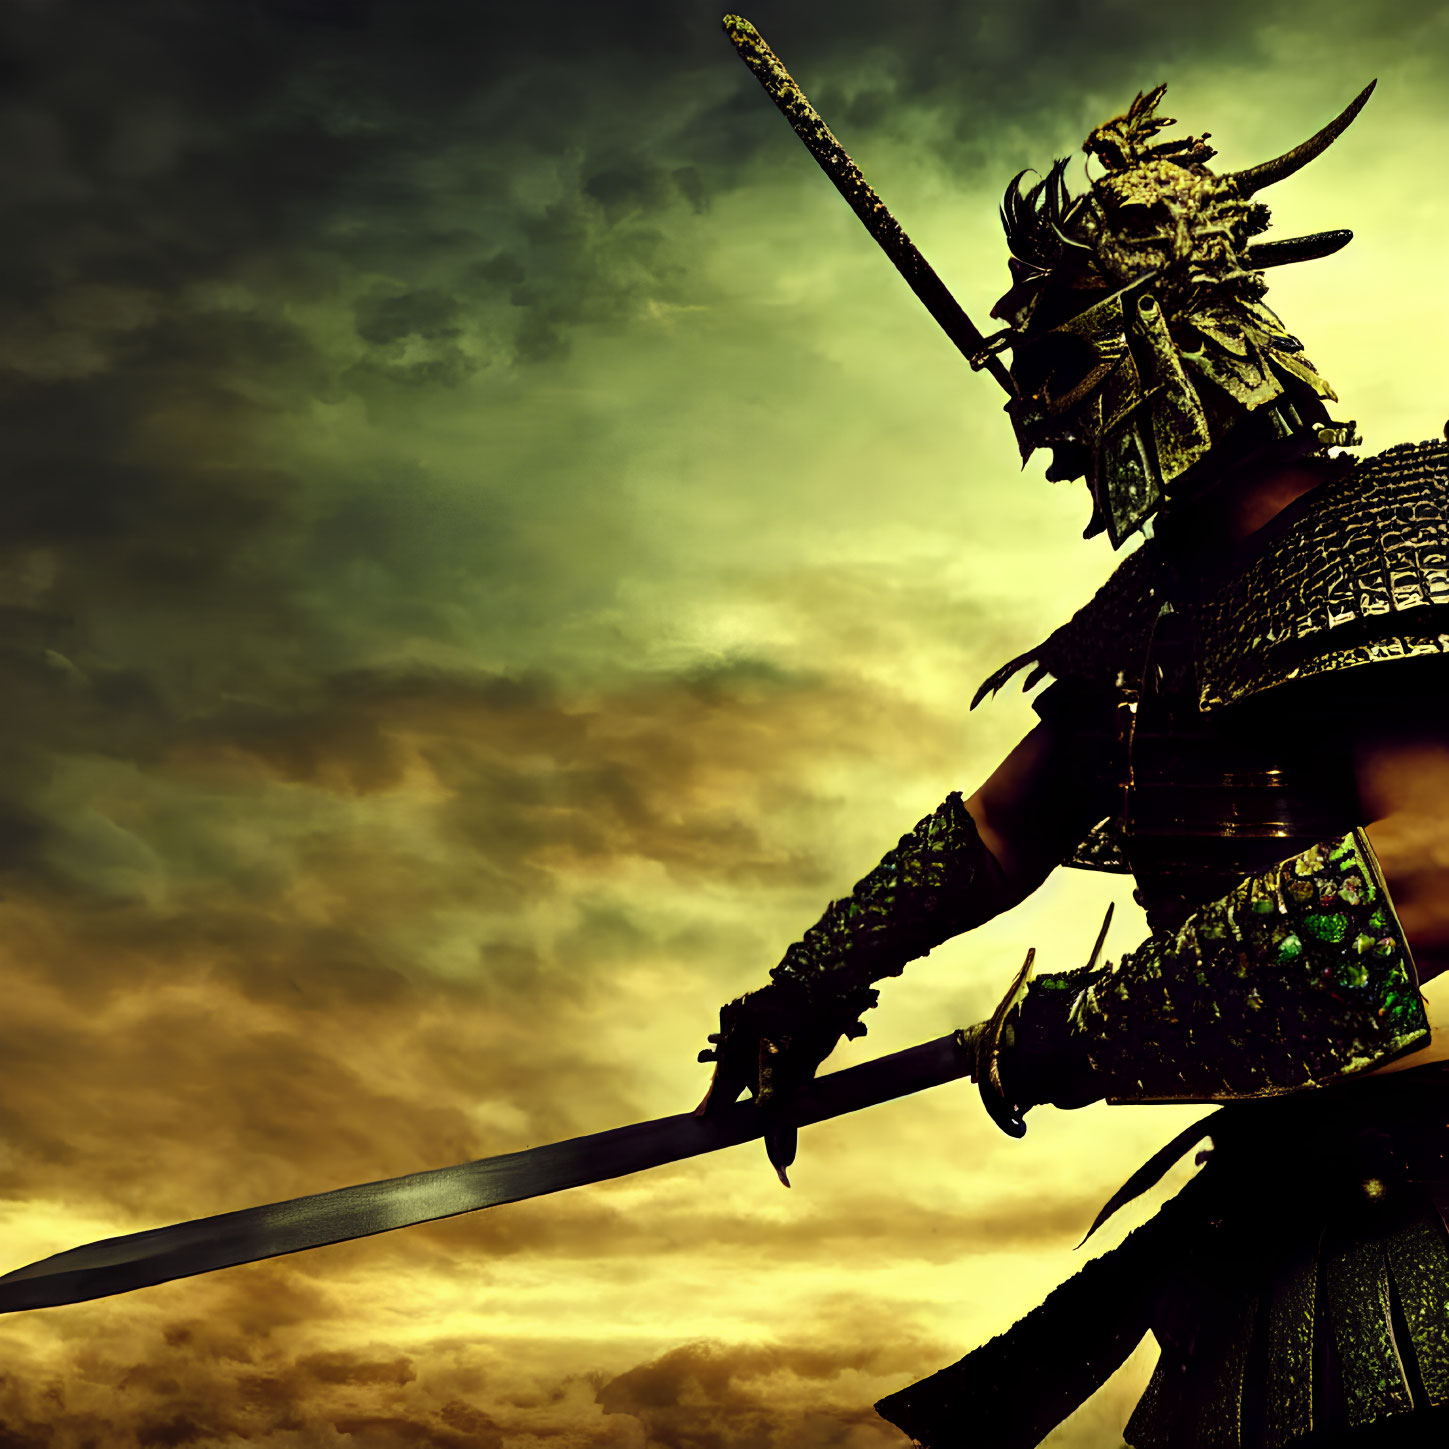 Silhouetted samurai in armor with sword against dramatic sunset sky